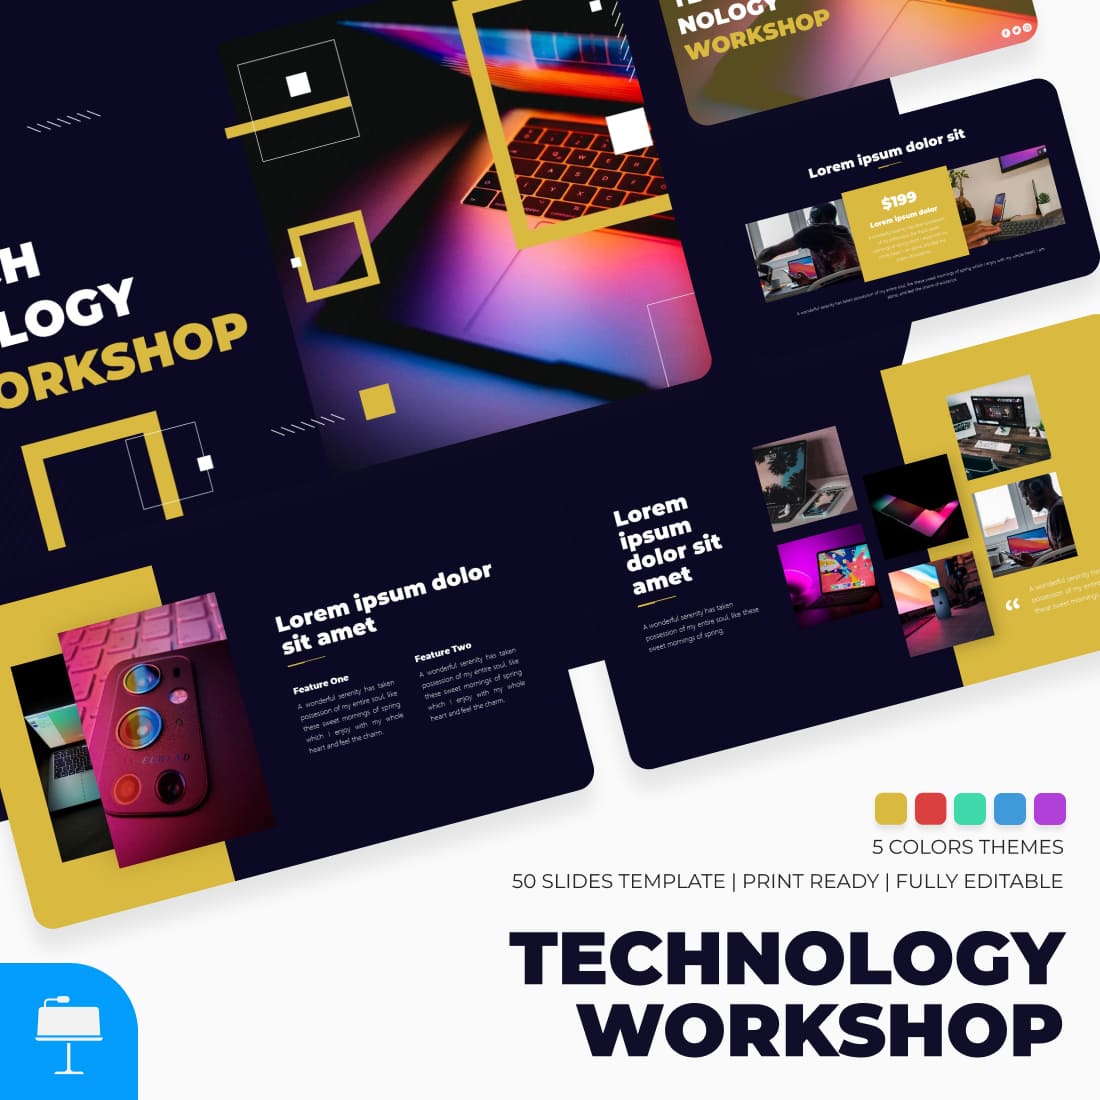 Workshop Technology Keynote Template main cover.